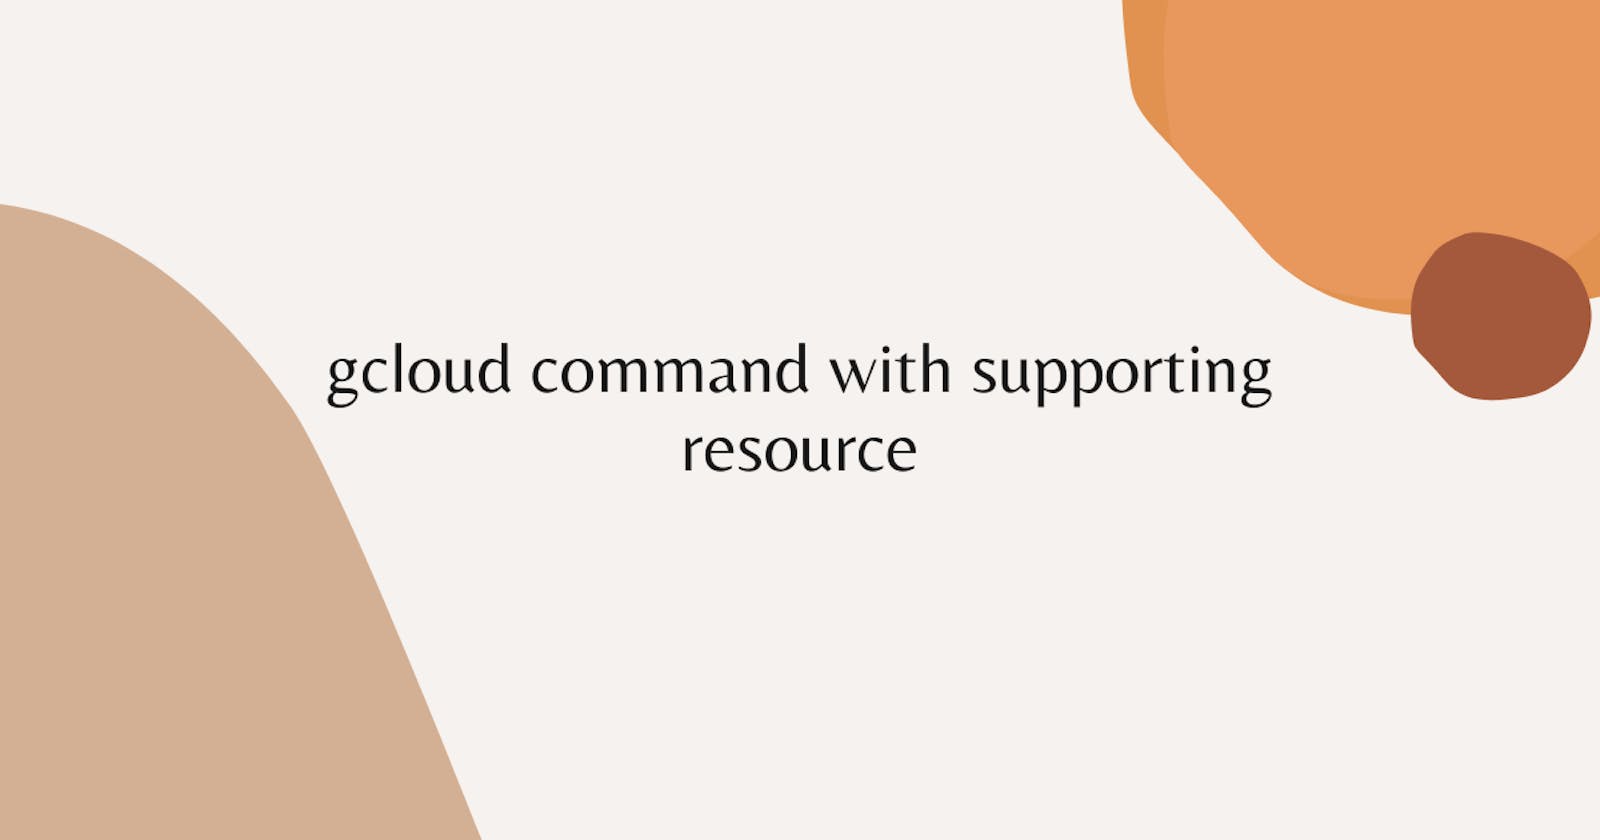 gcloud command with supporting resource